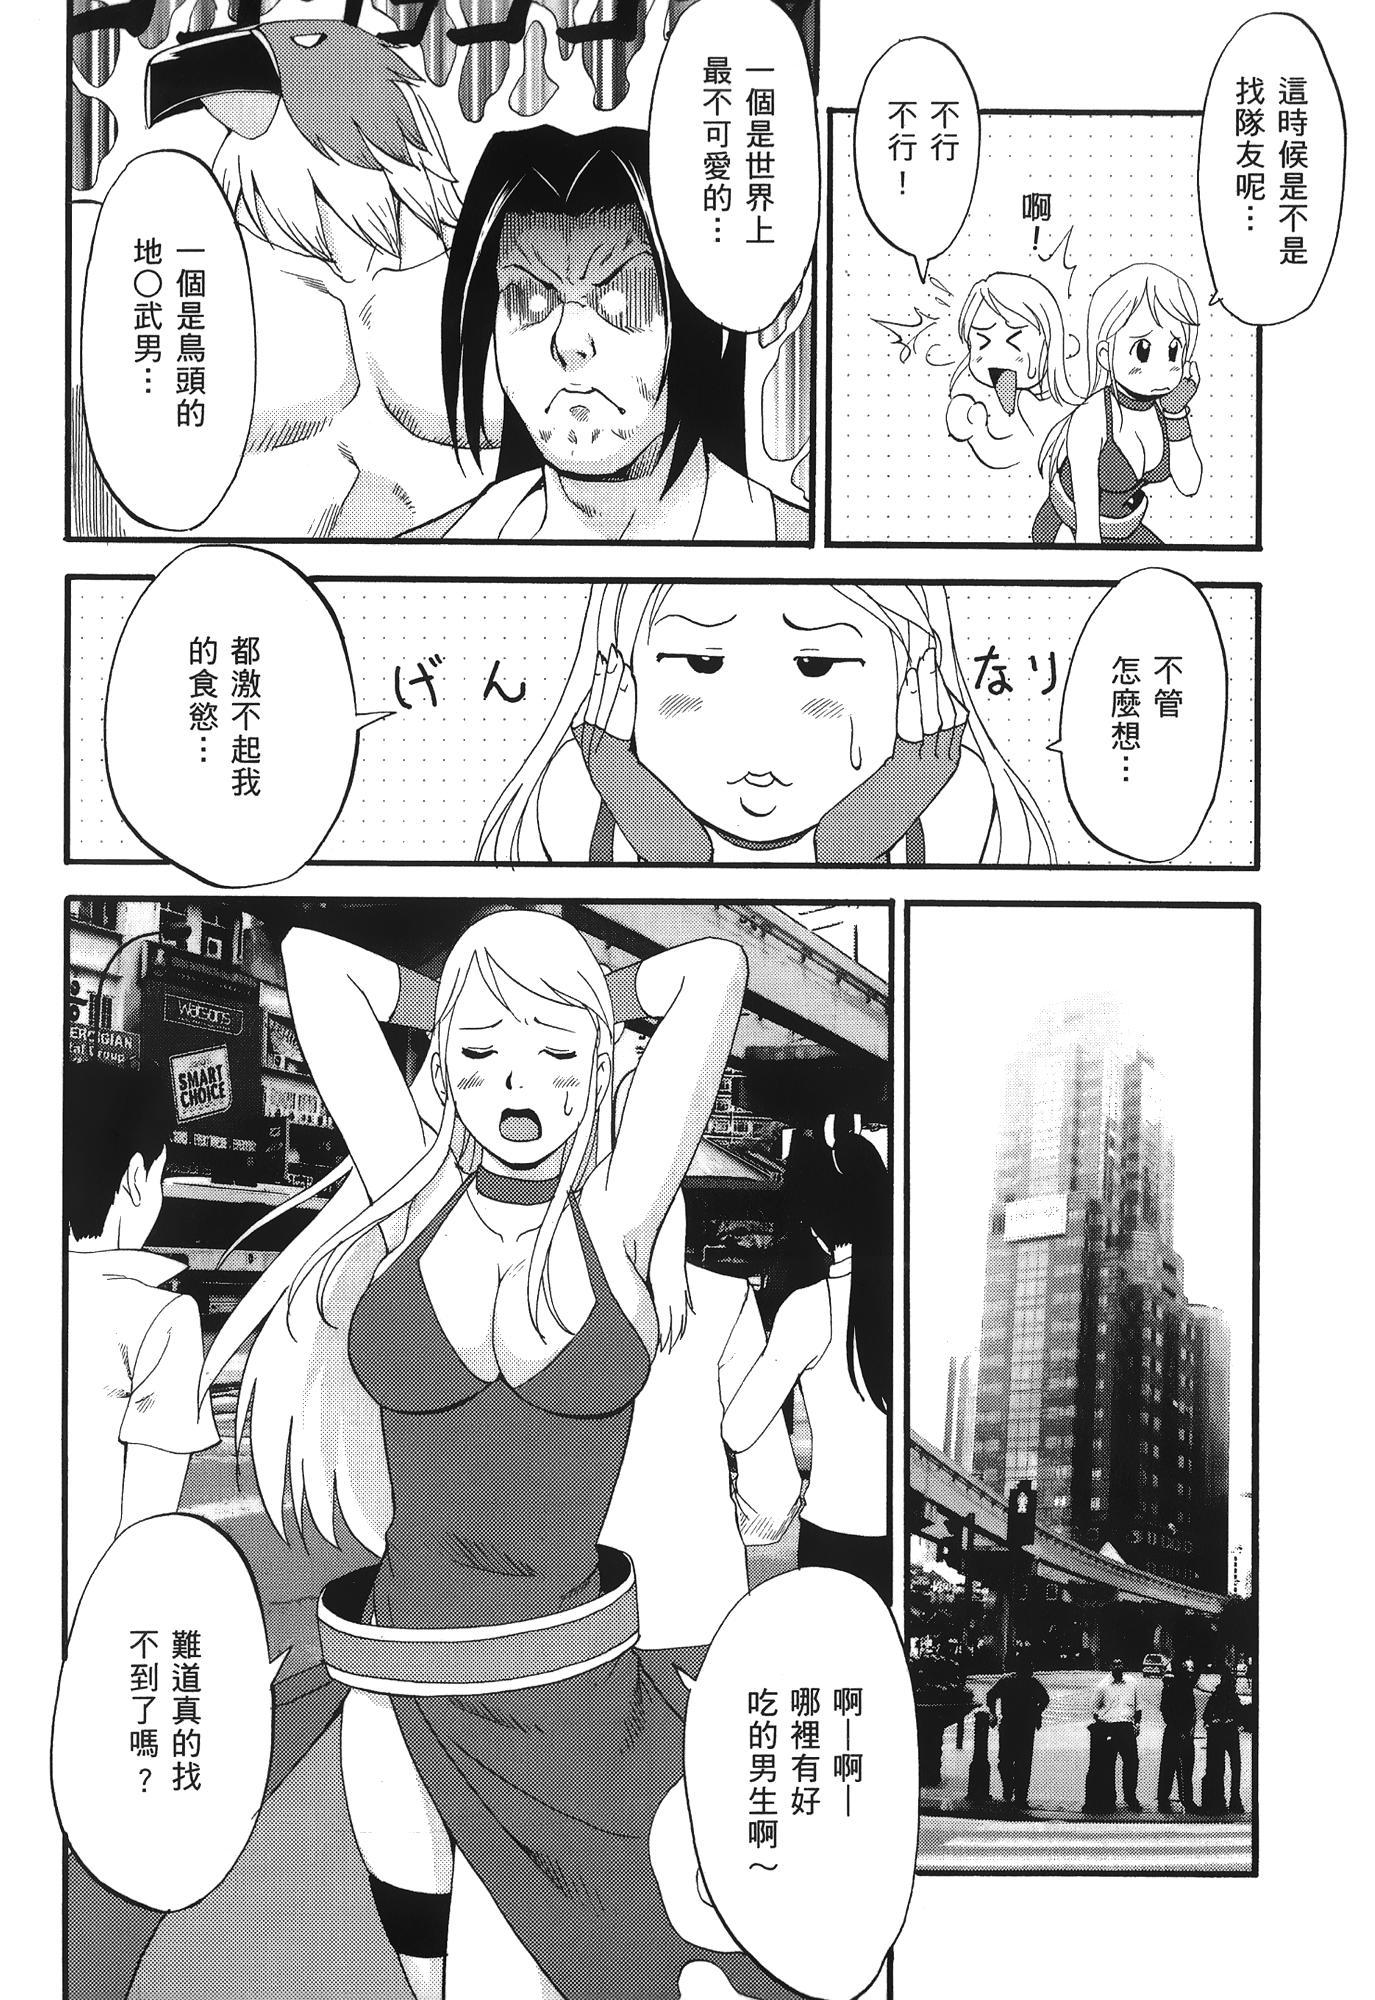 Jizz [Saigado] THE YURI & FRIENDS 6 (King of Fighters) | 武鬥美少女 [Chinese] - King of fighters Twinks - Page 3